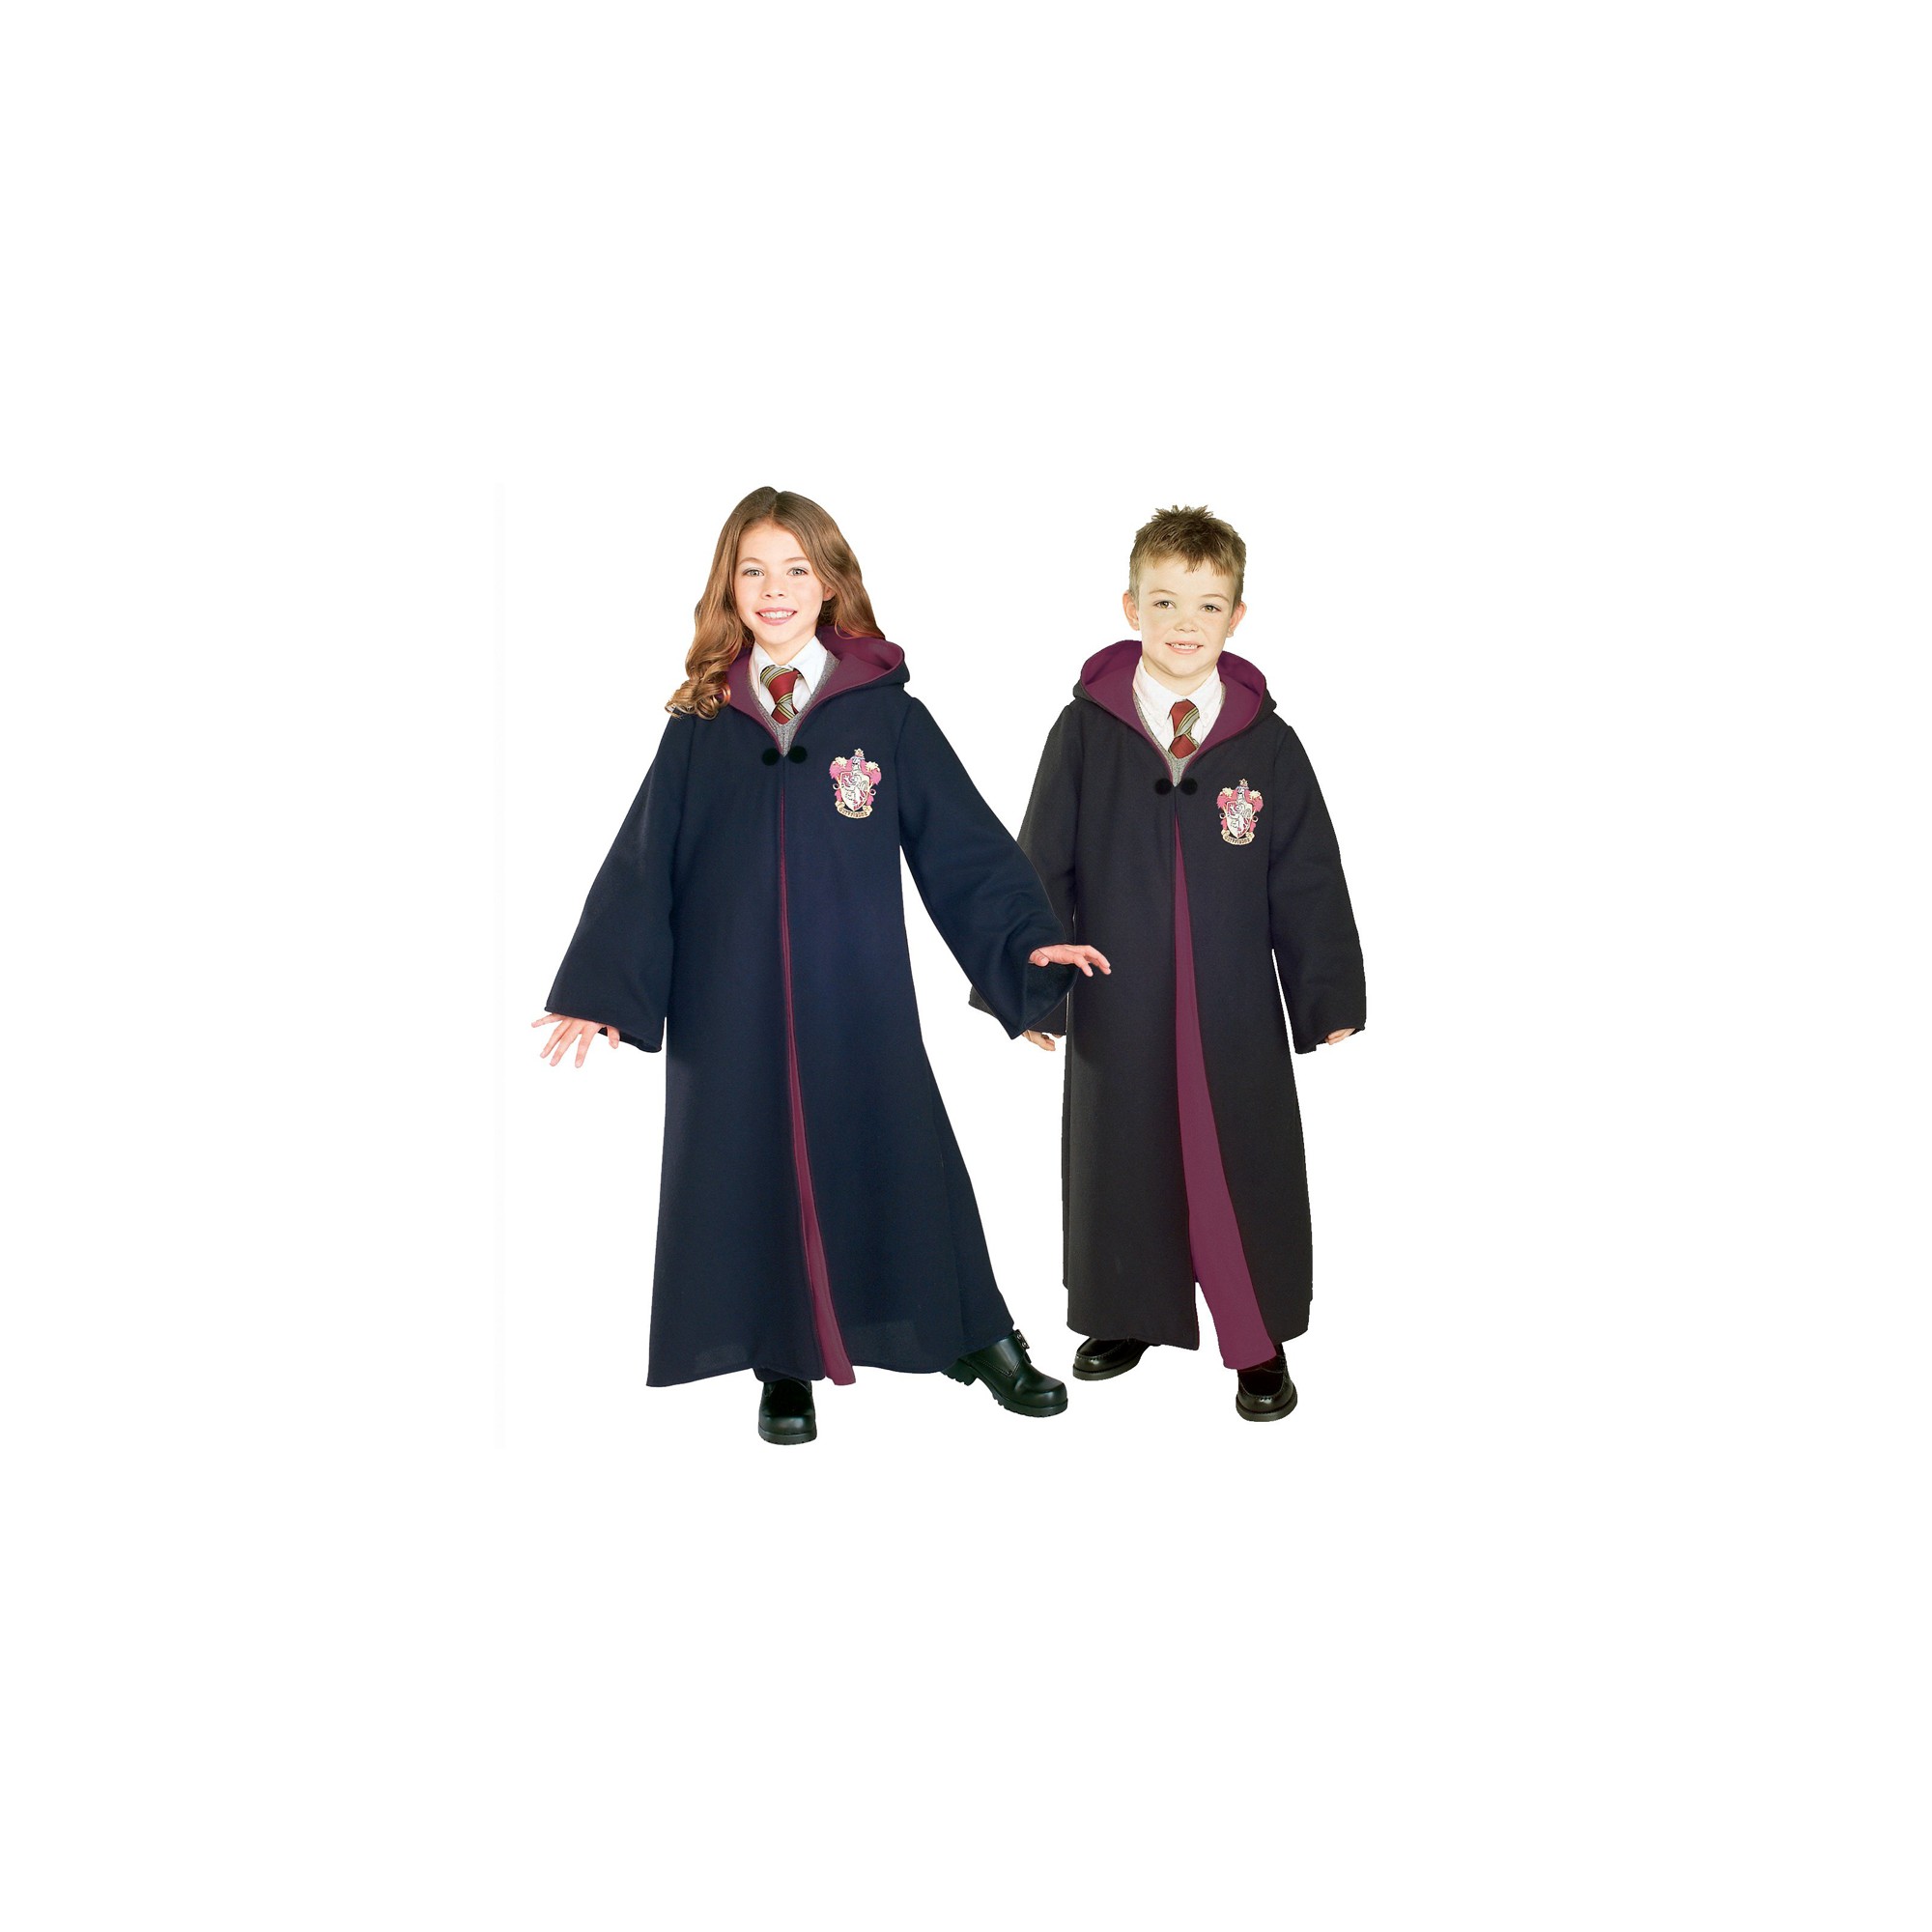 Halloween Harry Potter Kids' Gryffindor Robe Deluxe Costume - Small, Adult Unisex, Size: Small(4-6), Black/White